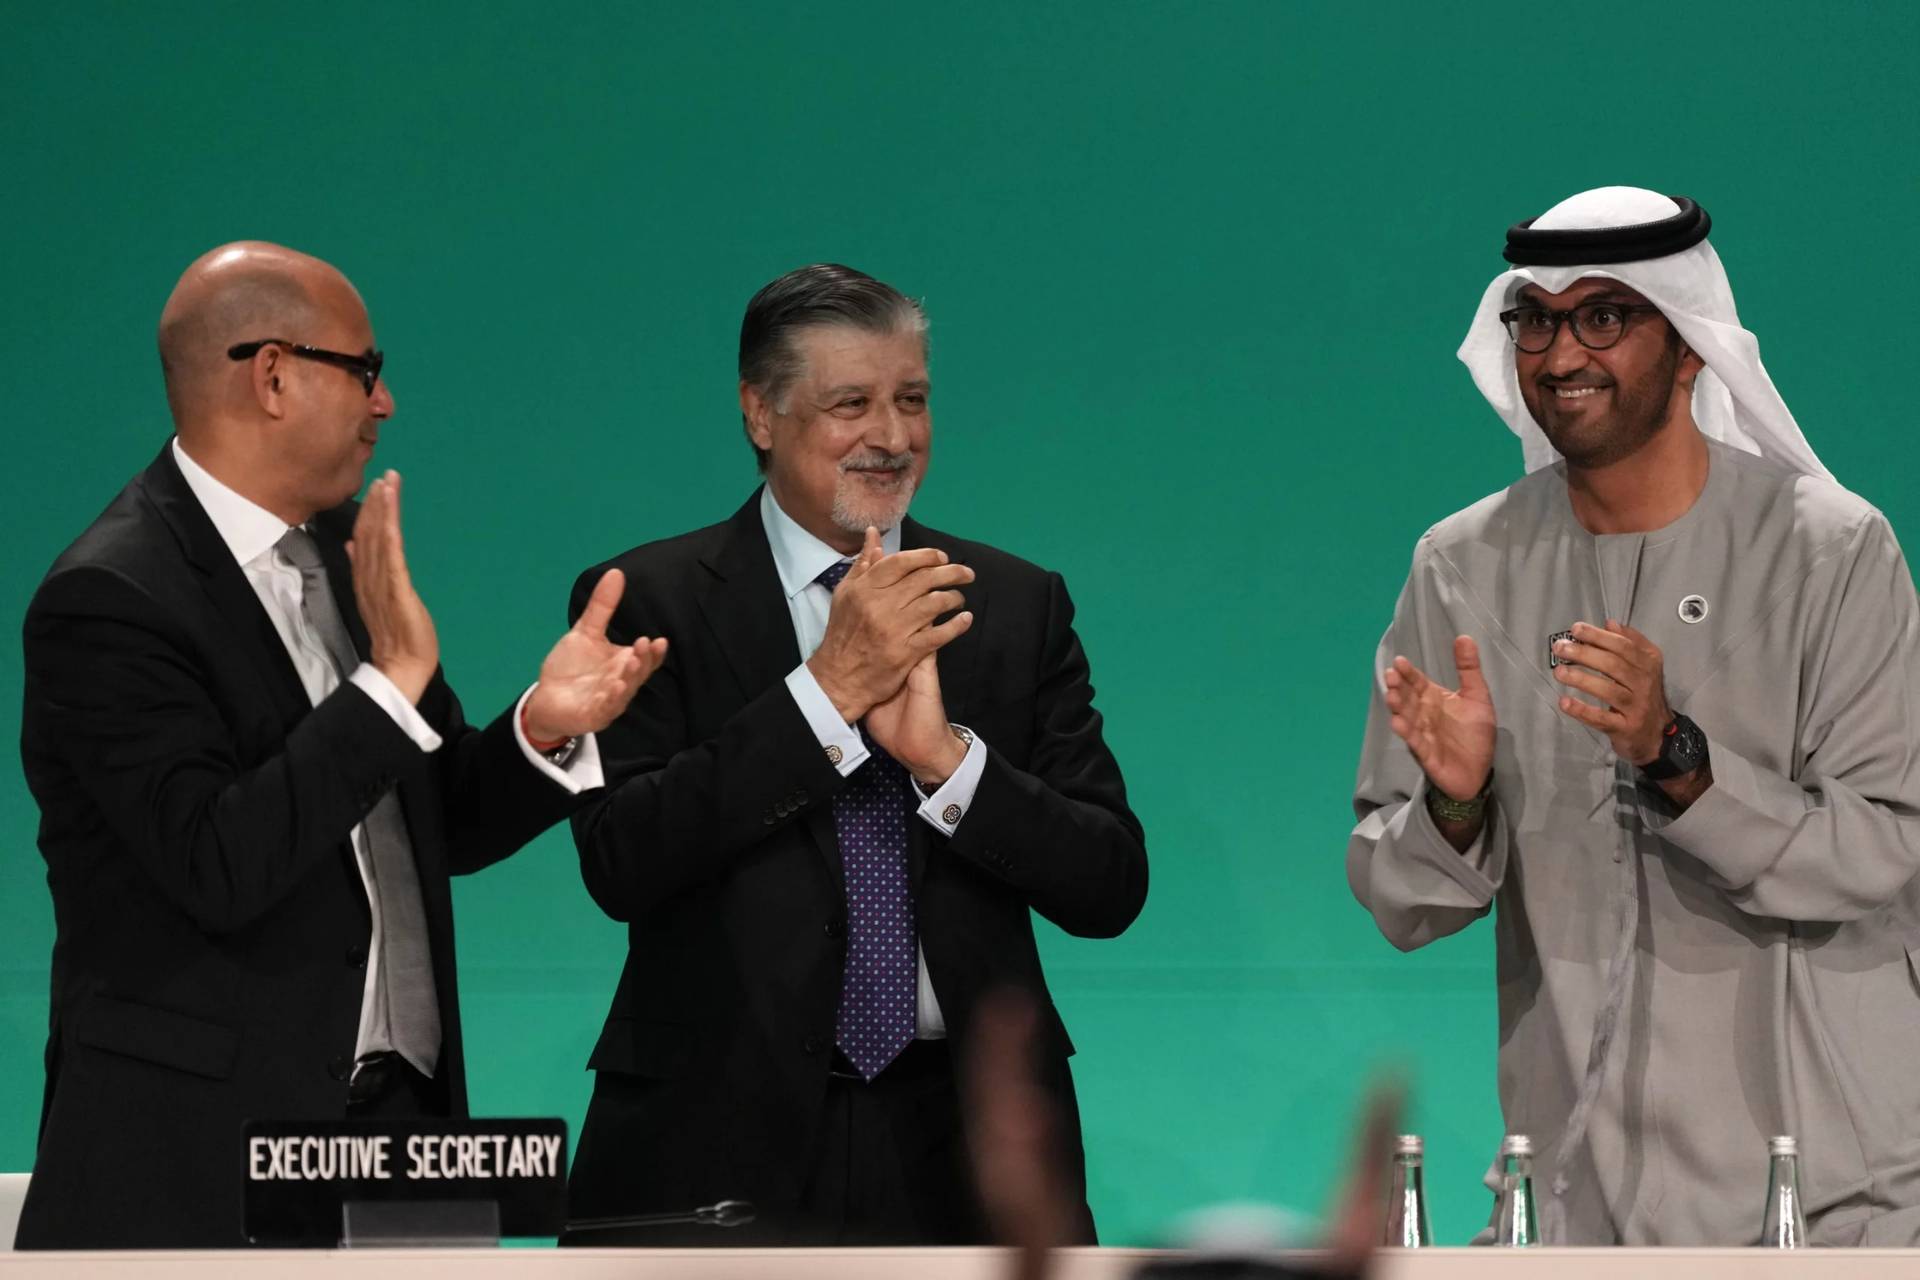 COP28 President Sultan al-Jaber, right, celebrates passing the global stocktake with United Nations Climate Chief Simon Stiell, left, and COP28 CEO Adnan Amin during a plenary session at the COP28 U.N. Climate Summit, Wednesday, Dec. 13, 2023, in Dubai, United Arab Emirates. (Credit: Kamran Jebreili/AP.)